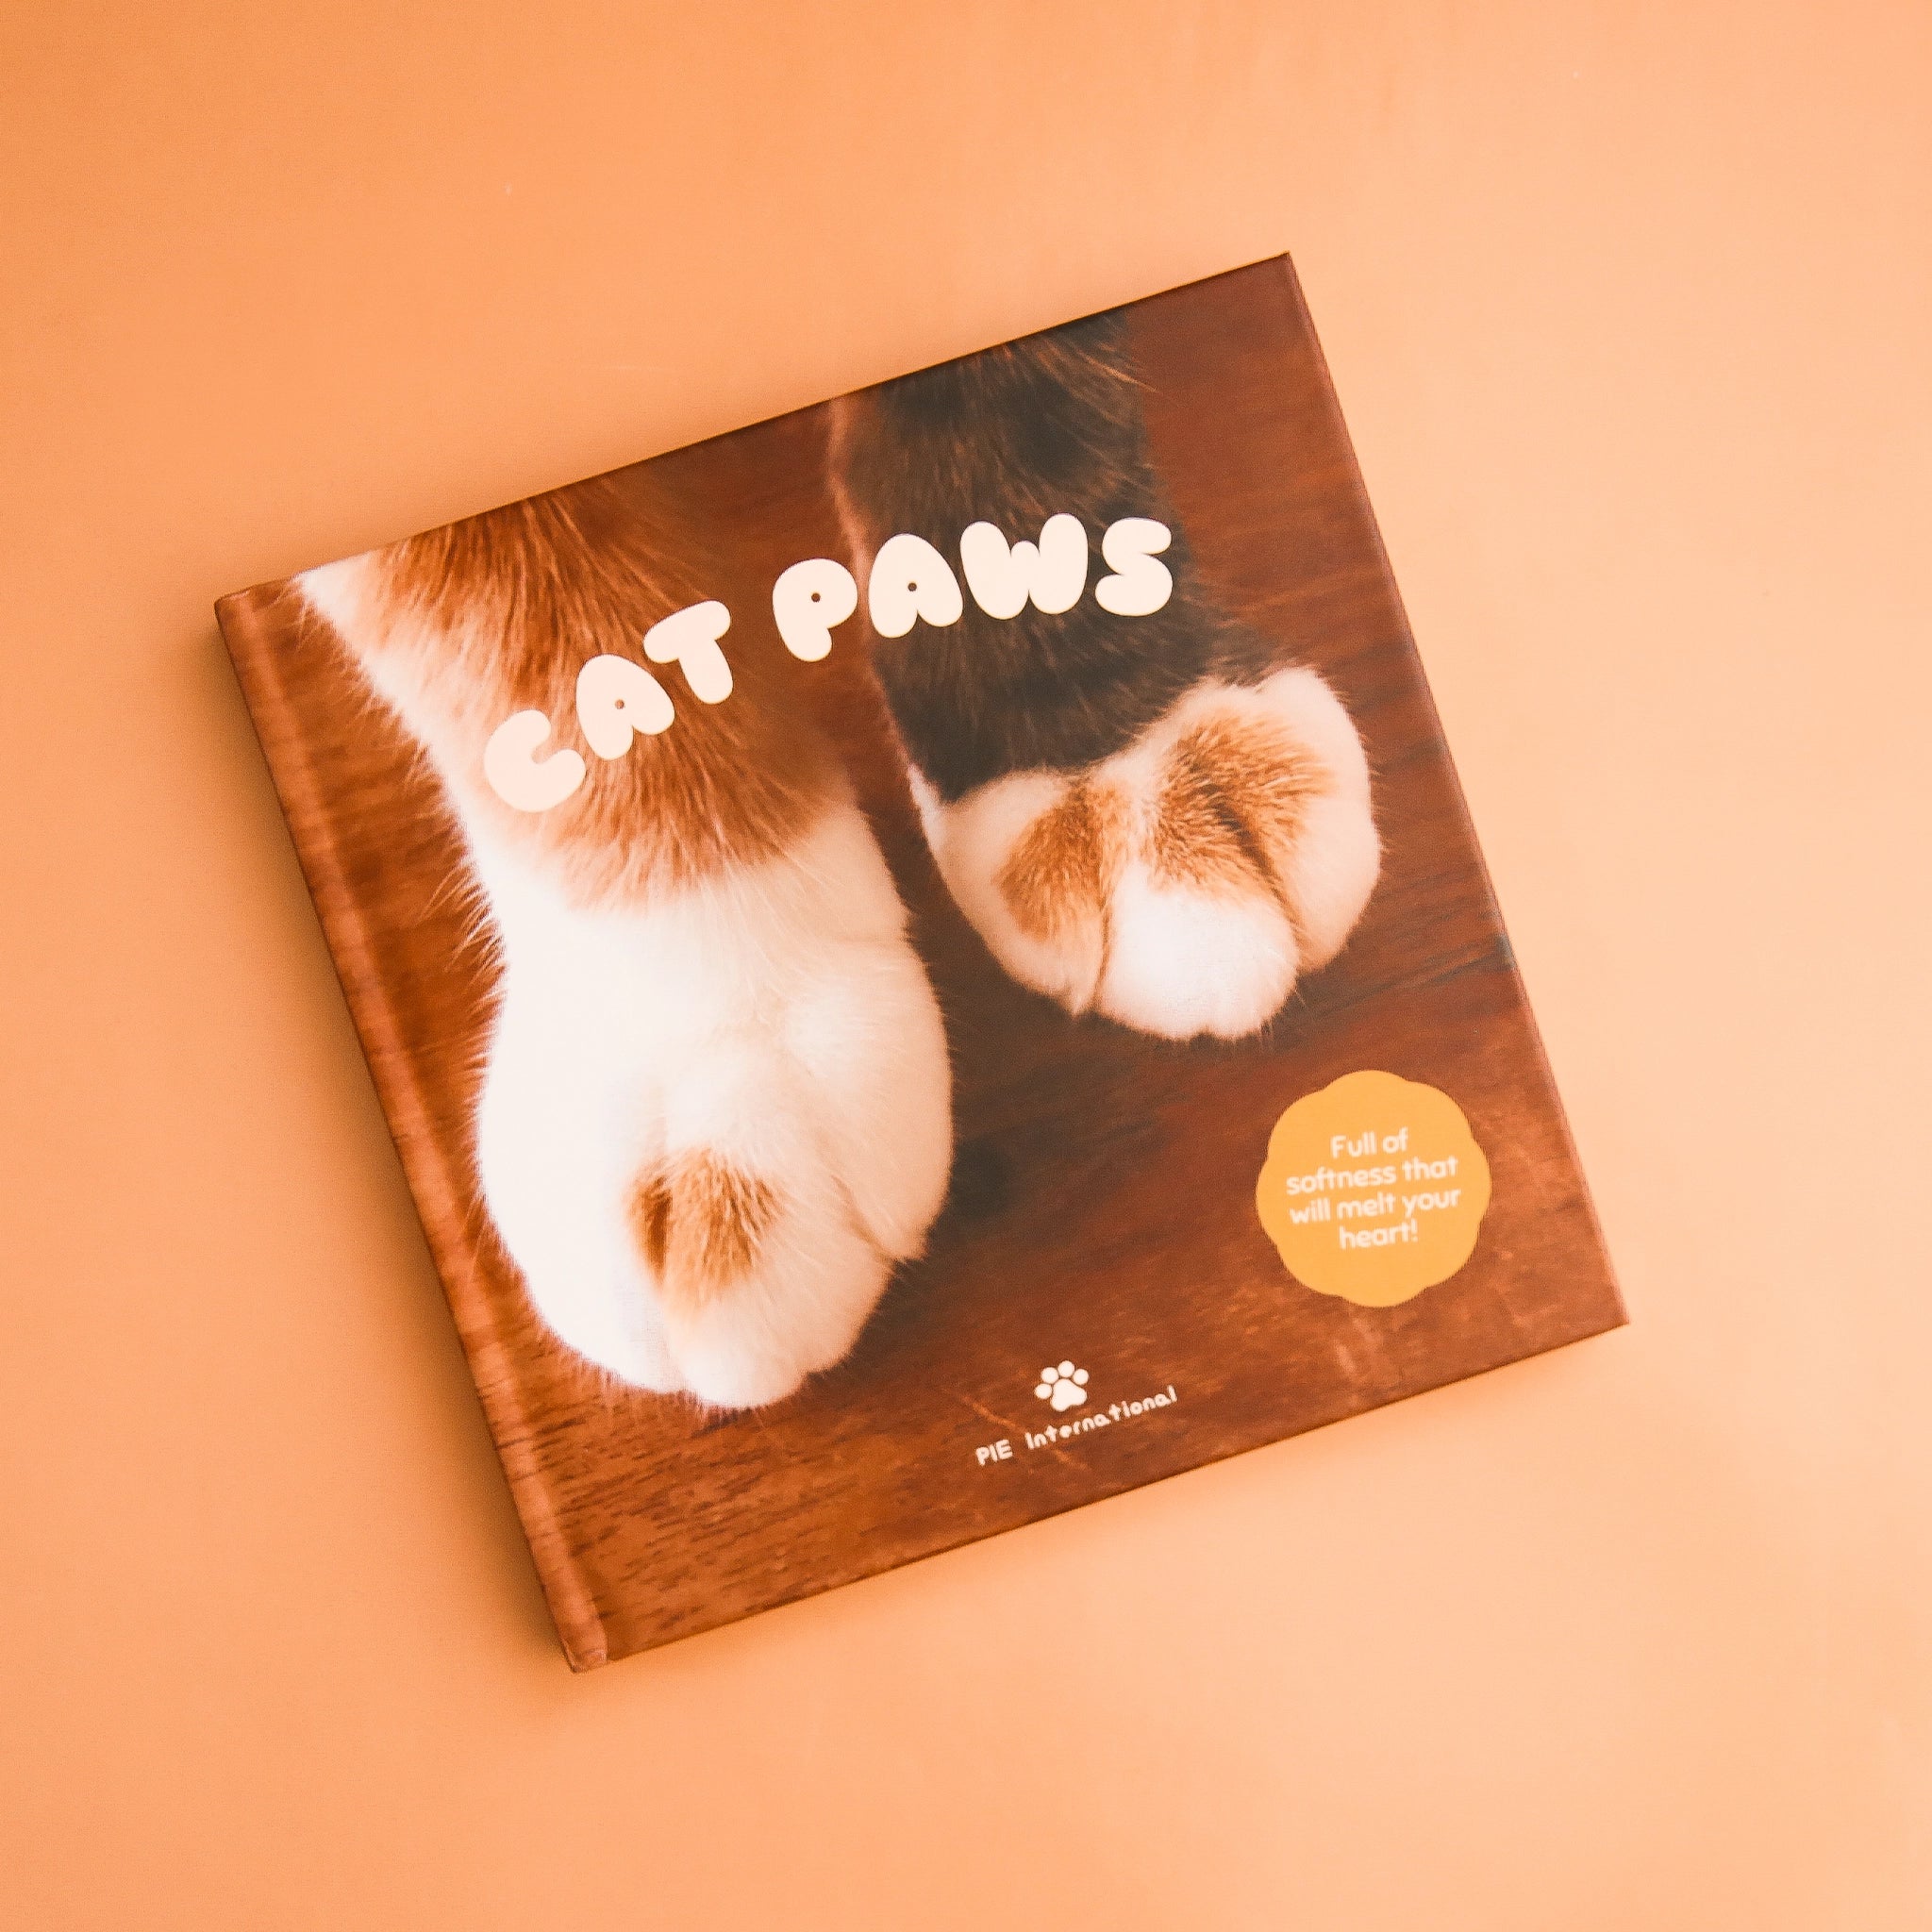 On a peach background is a book cover featuring a photograph of cat paws against a wood floor along with the title, "Cat Paws", "Full of softness that will melt your heart!".